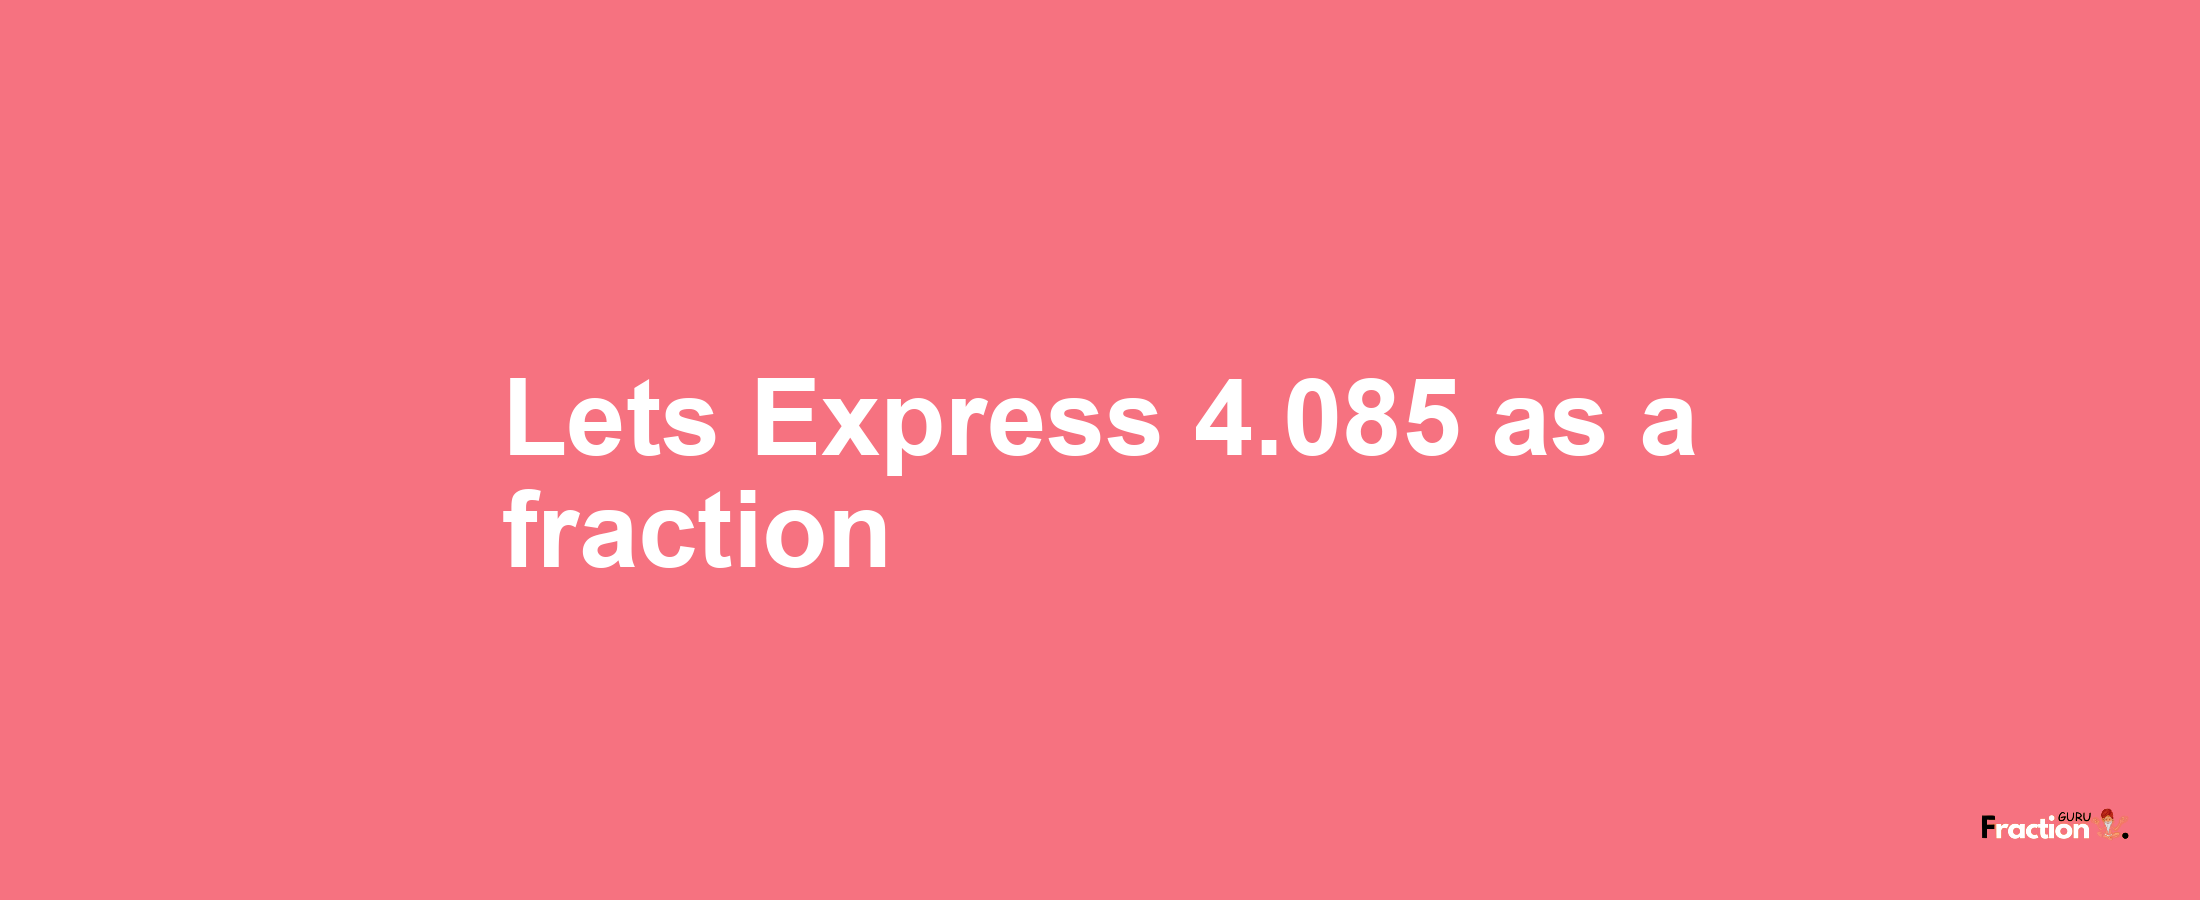 Lets Express 4.085 as afraction